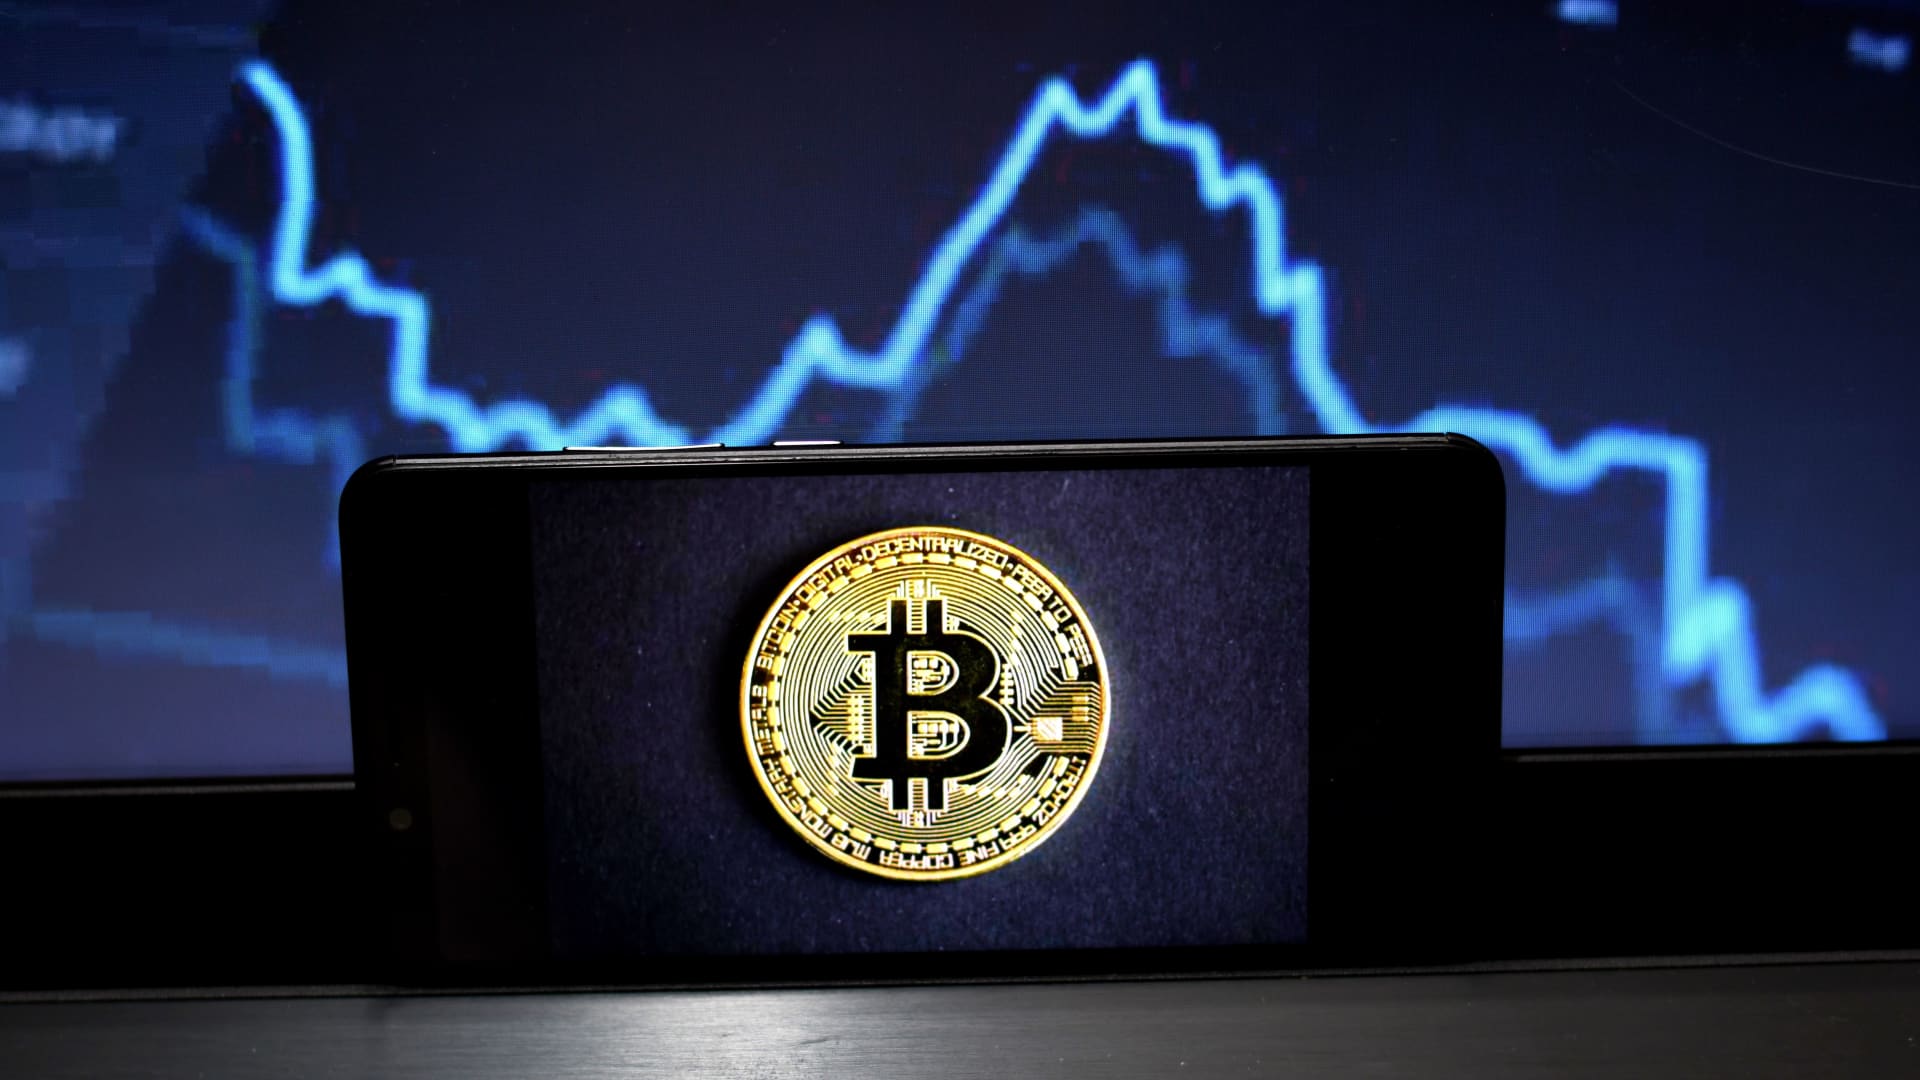 Bitcoin trims its losses after breaking below $39,000 to lowest level in 7 weeks